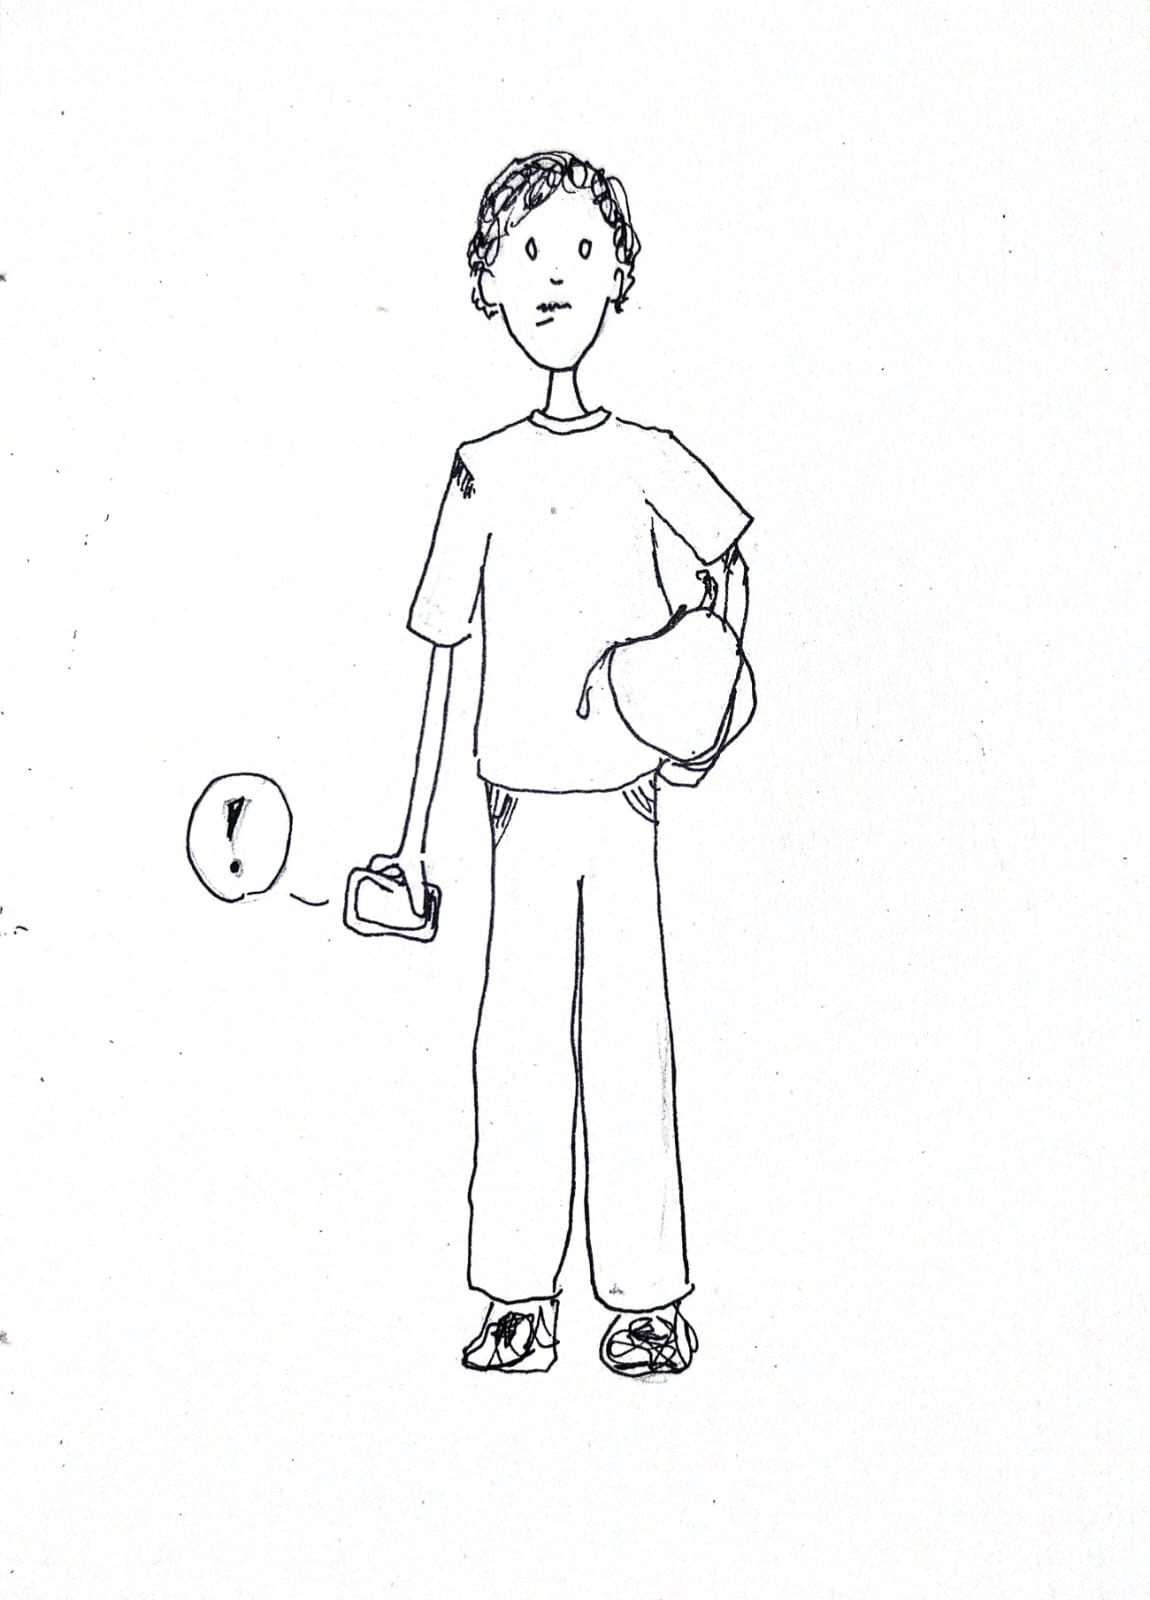 an illustration of a bike taxi driver holding their phone in one hand and their helmet in the other